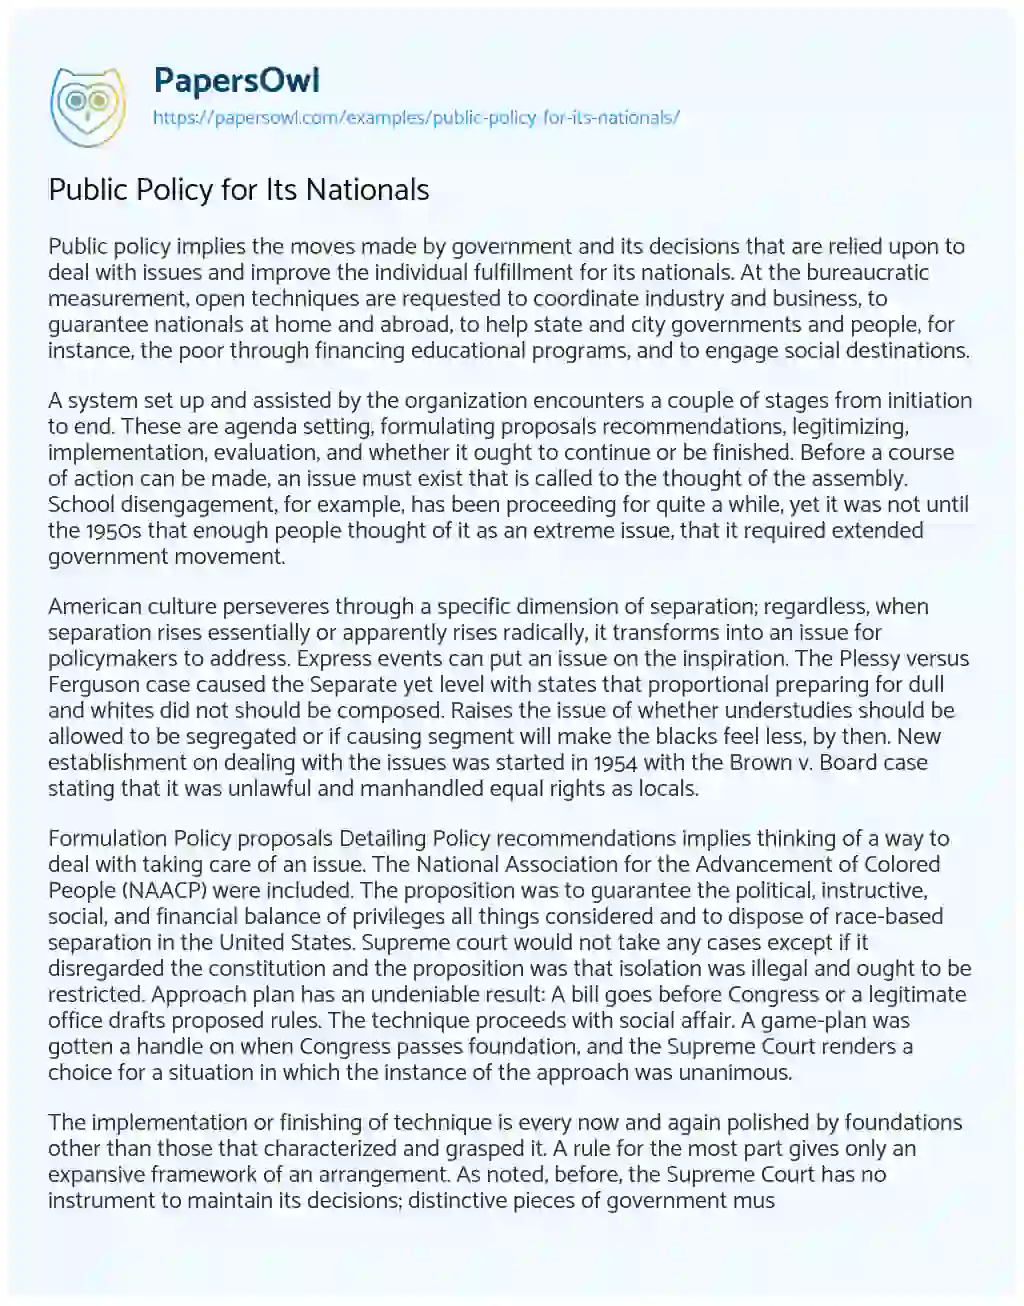 Essay on Public Policy for its Nationals